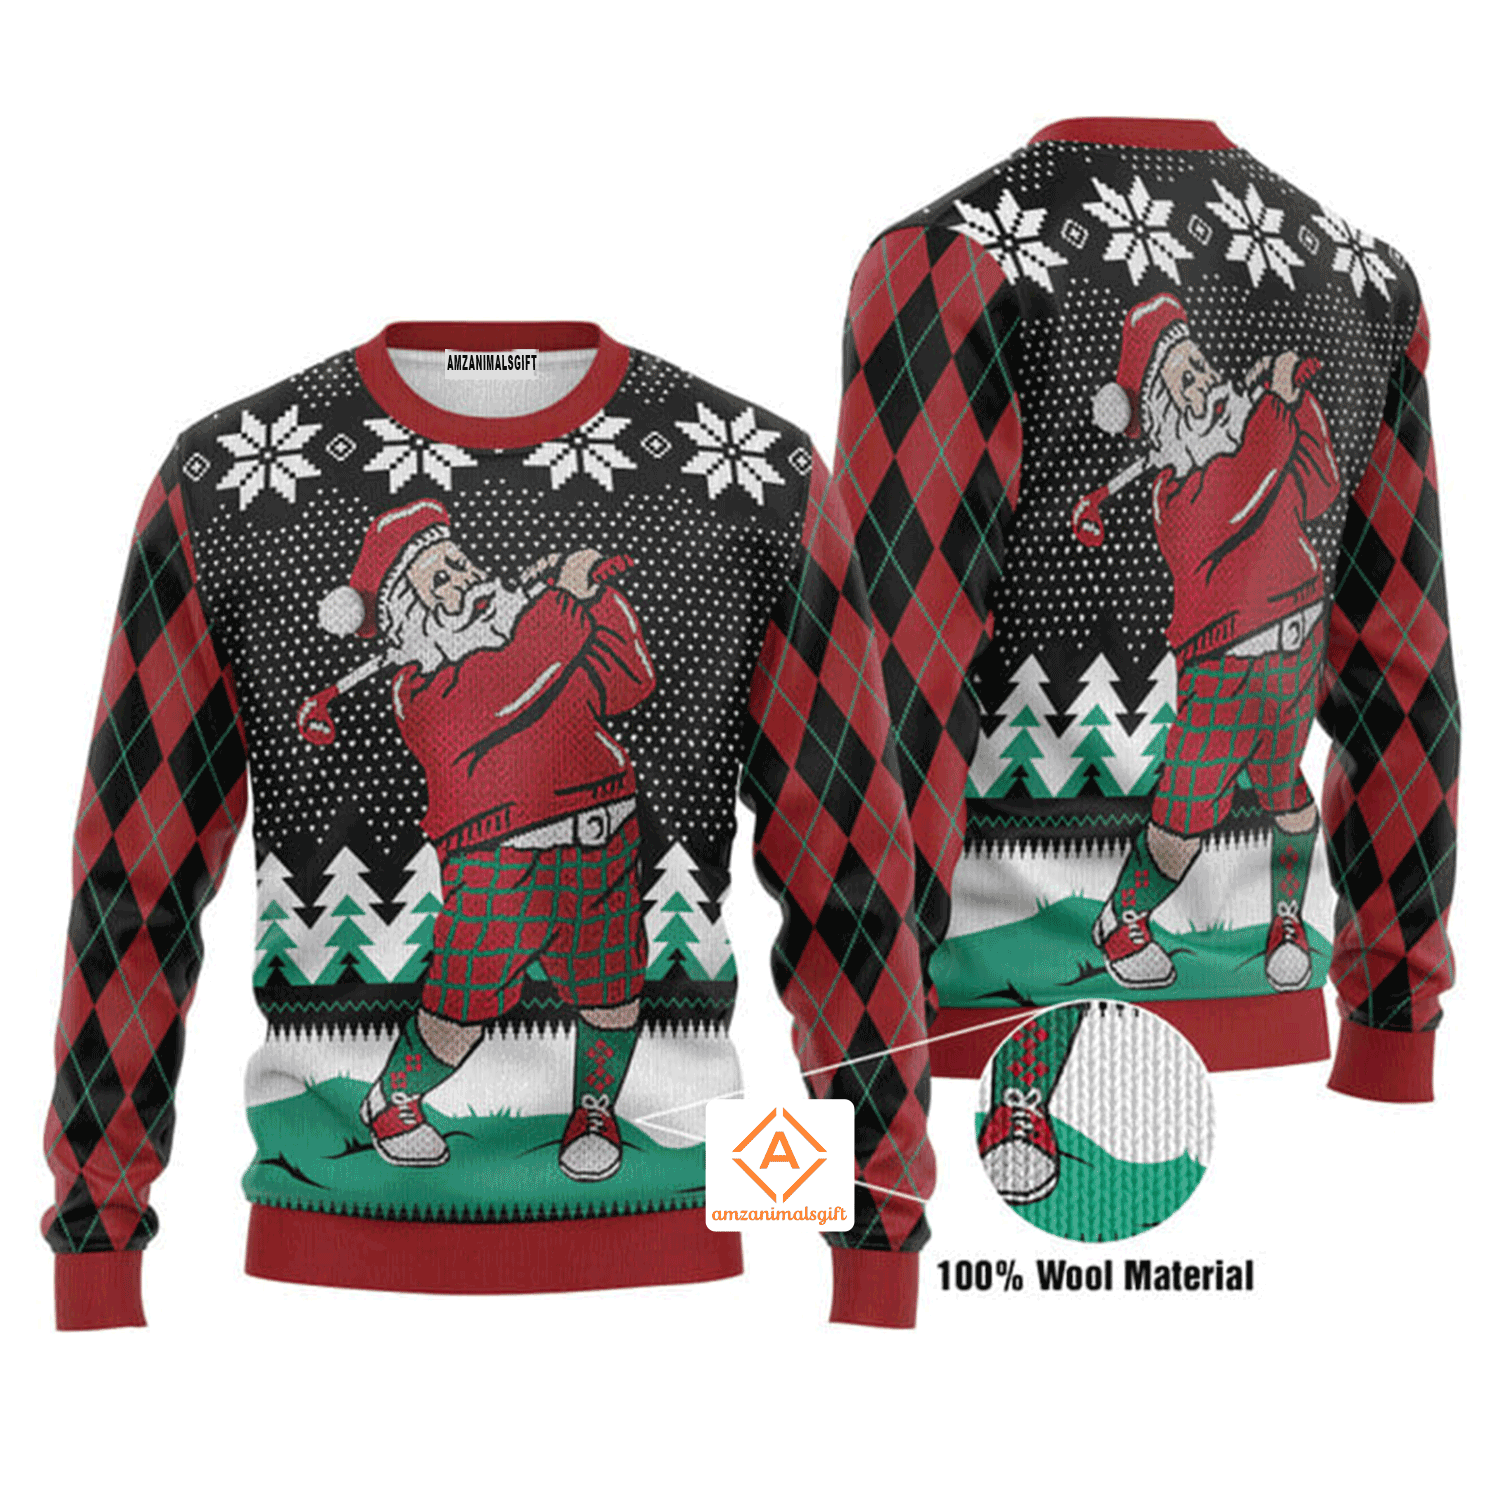 Santa Love Golf Christmas Sweater, Ugly Sweater For Men & Women, Perfect Outfit For Christmas New Year Autumn Winter